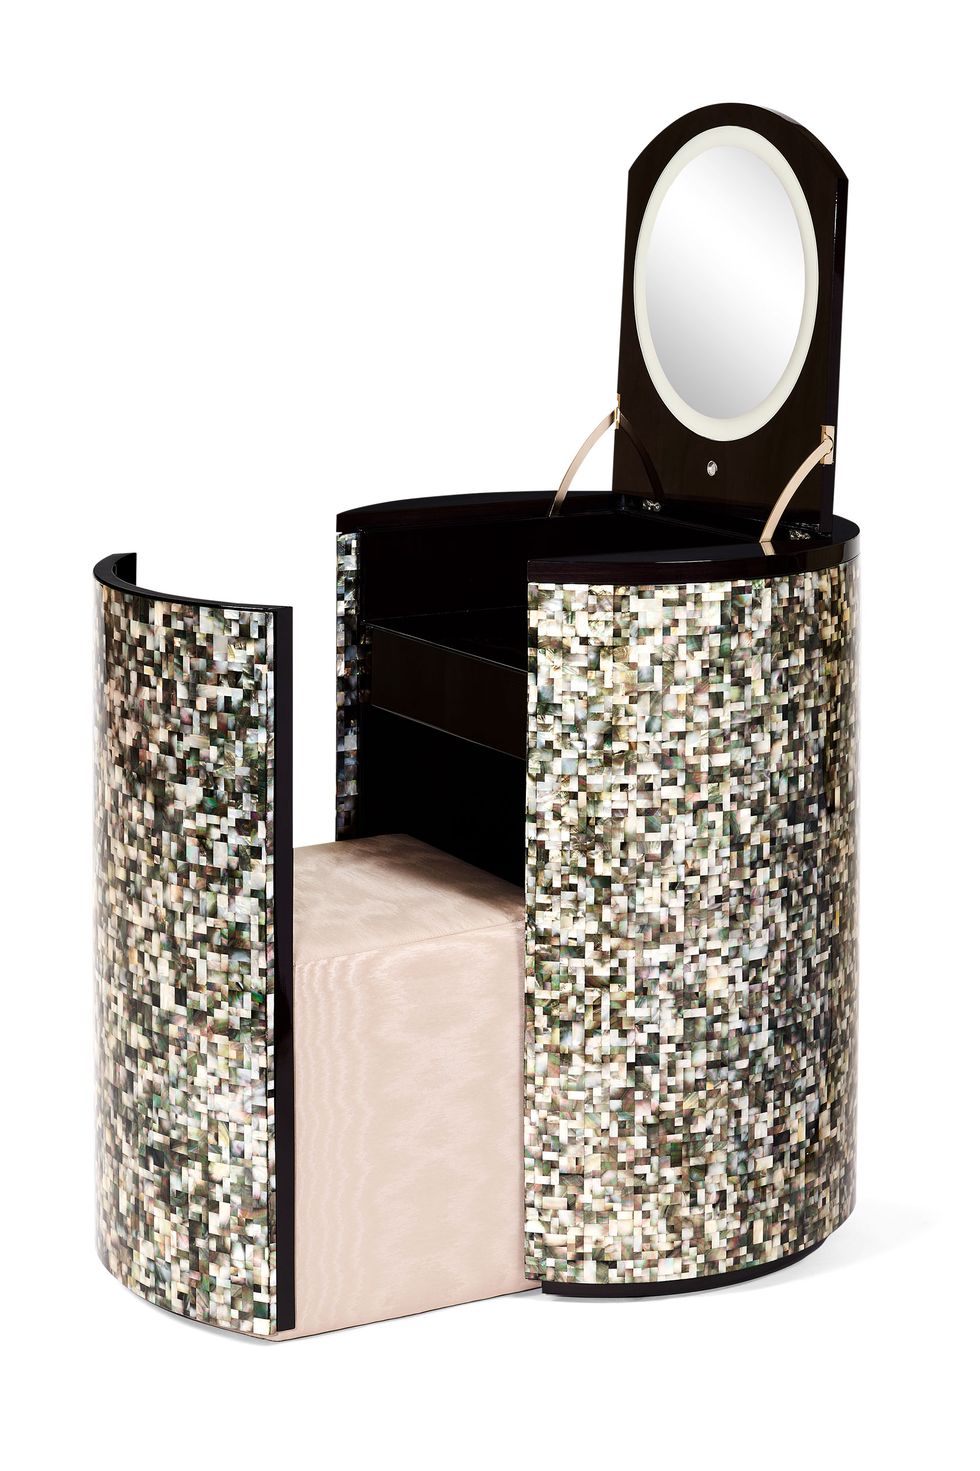 sparkly mosaic art deco vanity with pop out poof chair in pink and a pop up mirror